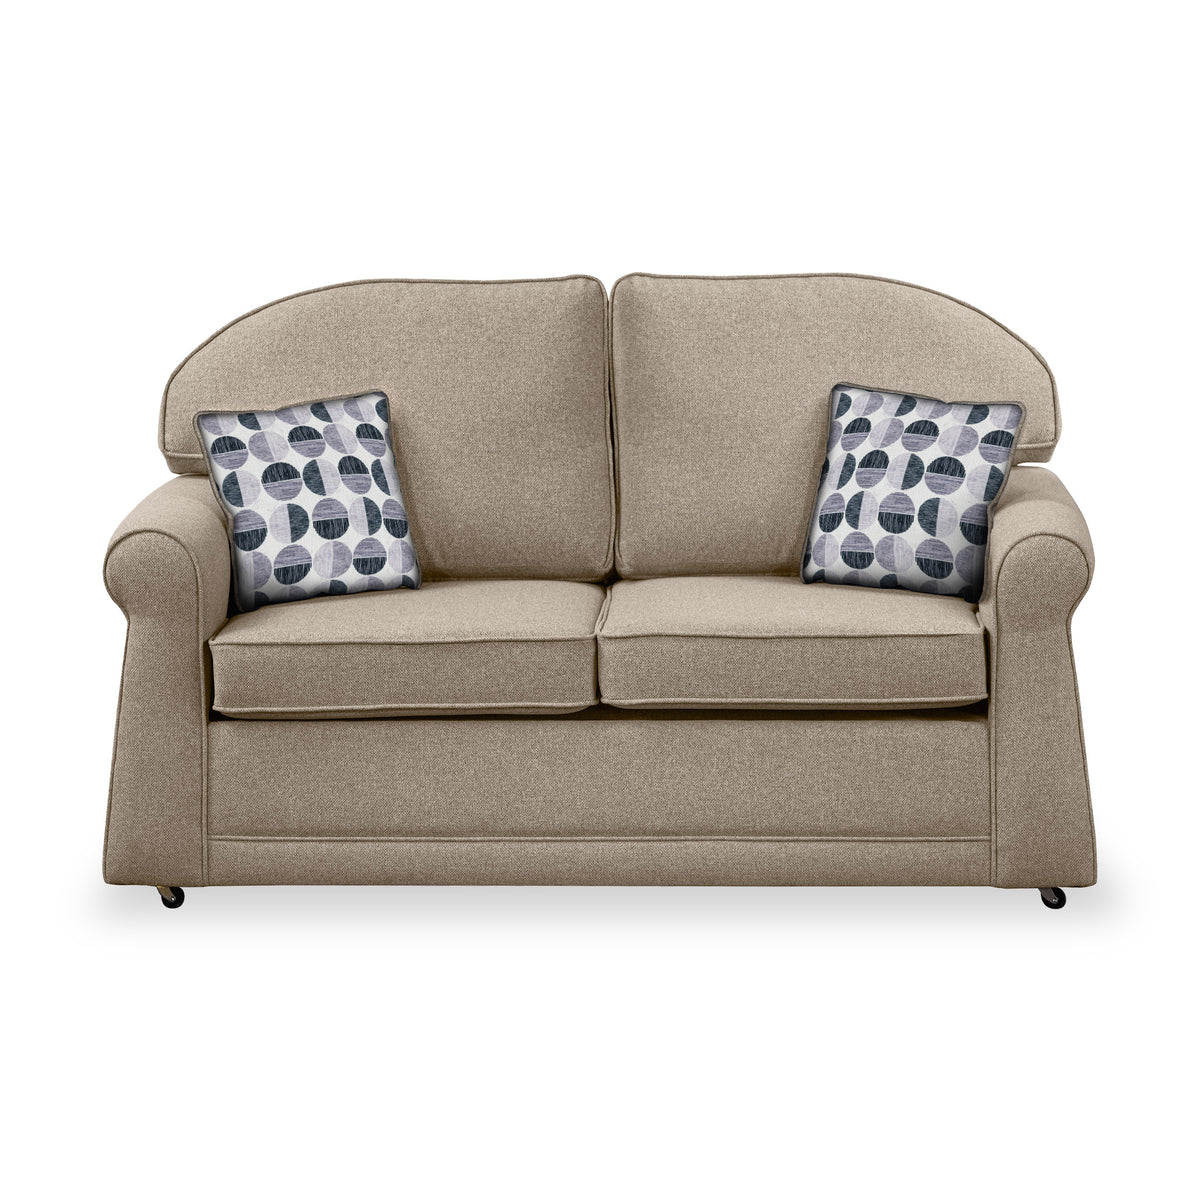 Croxdon Oatmeal Faux Linen 2 Seater Sofabed with Mono Scatter Cushions from Roseland Furniture